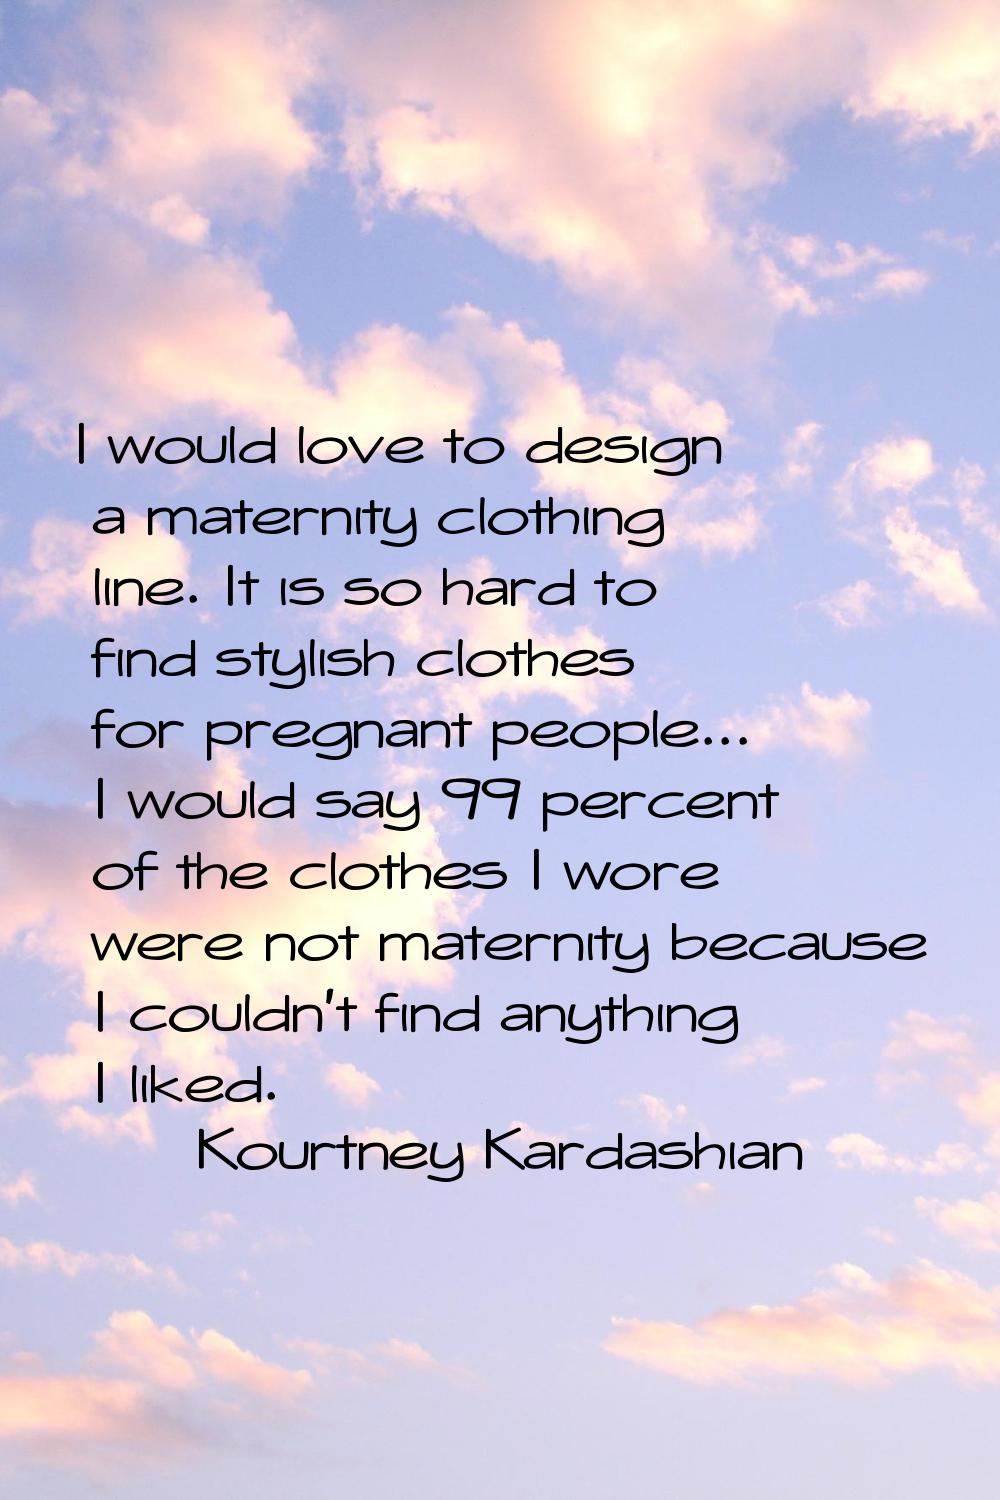 I would love to design a maternity clothing line. It is so hard to find stylish clothes for pregnan